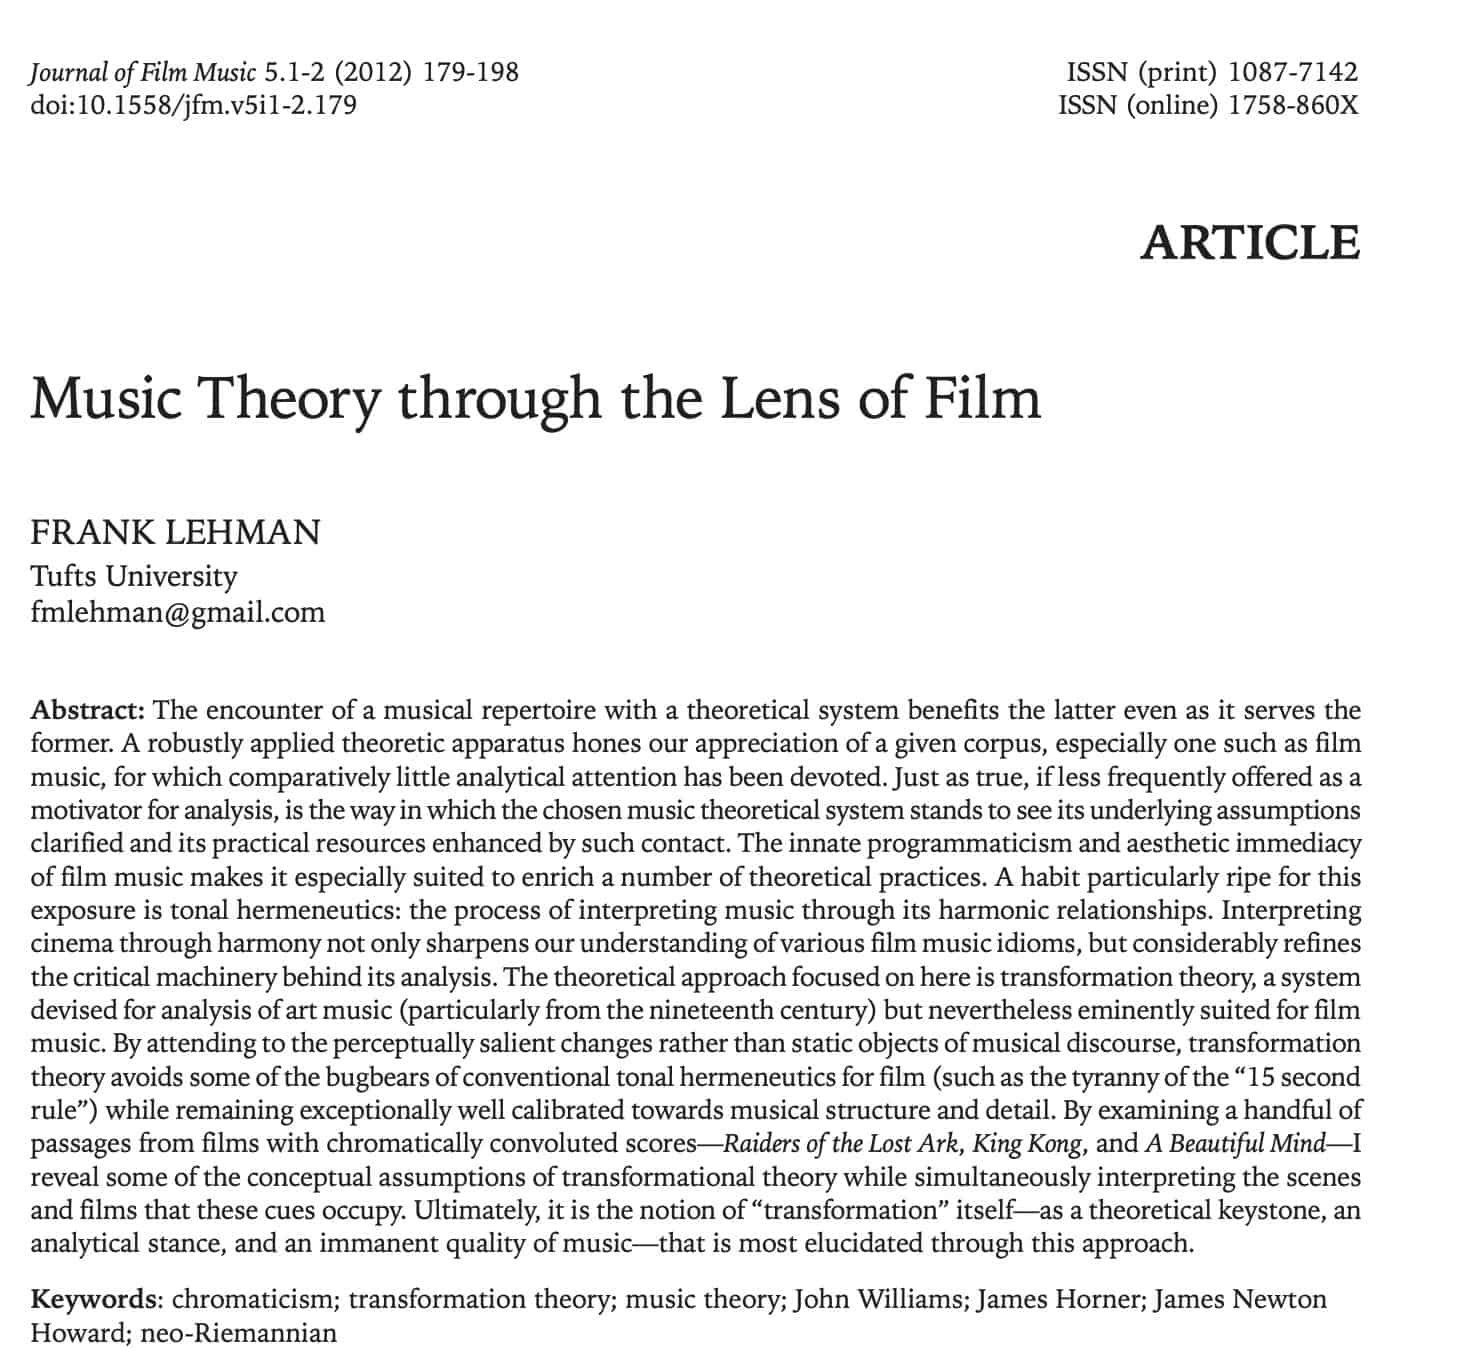 Music Theory Through the Lens of Film by Frank Lehman 1